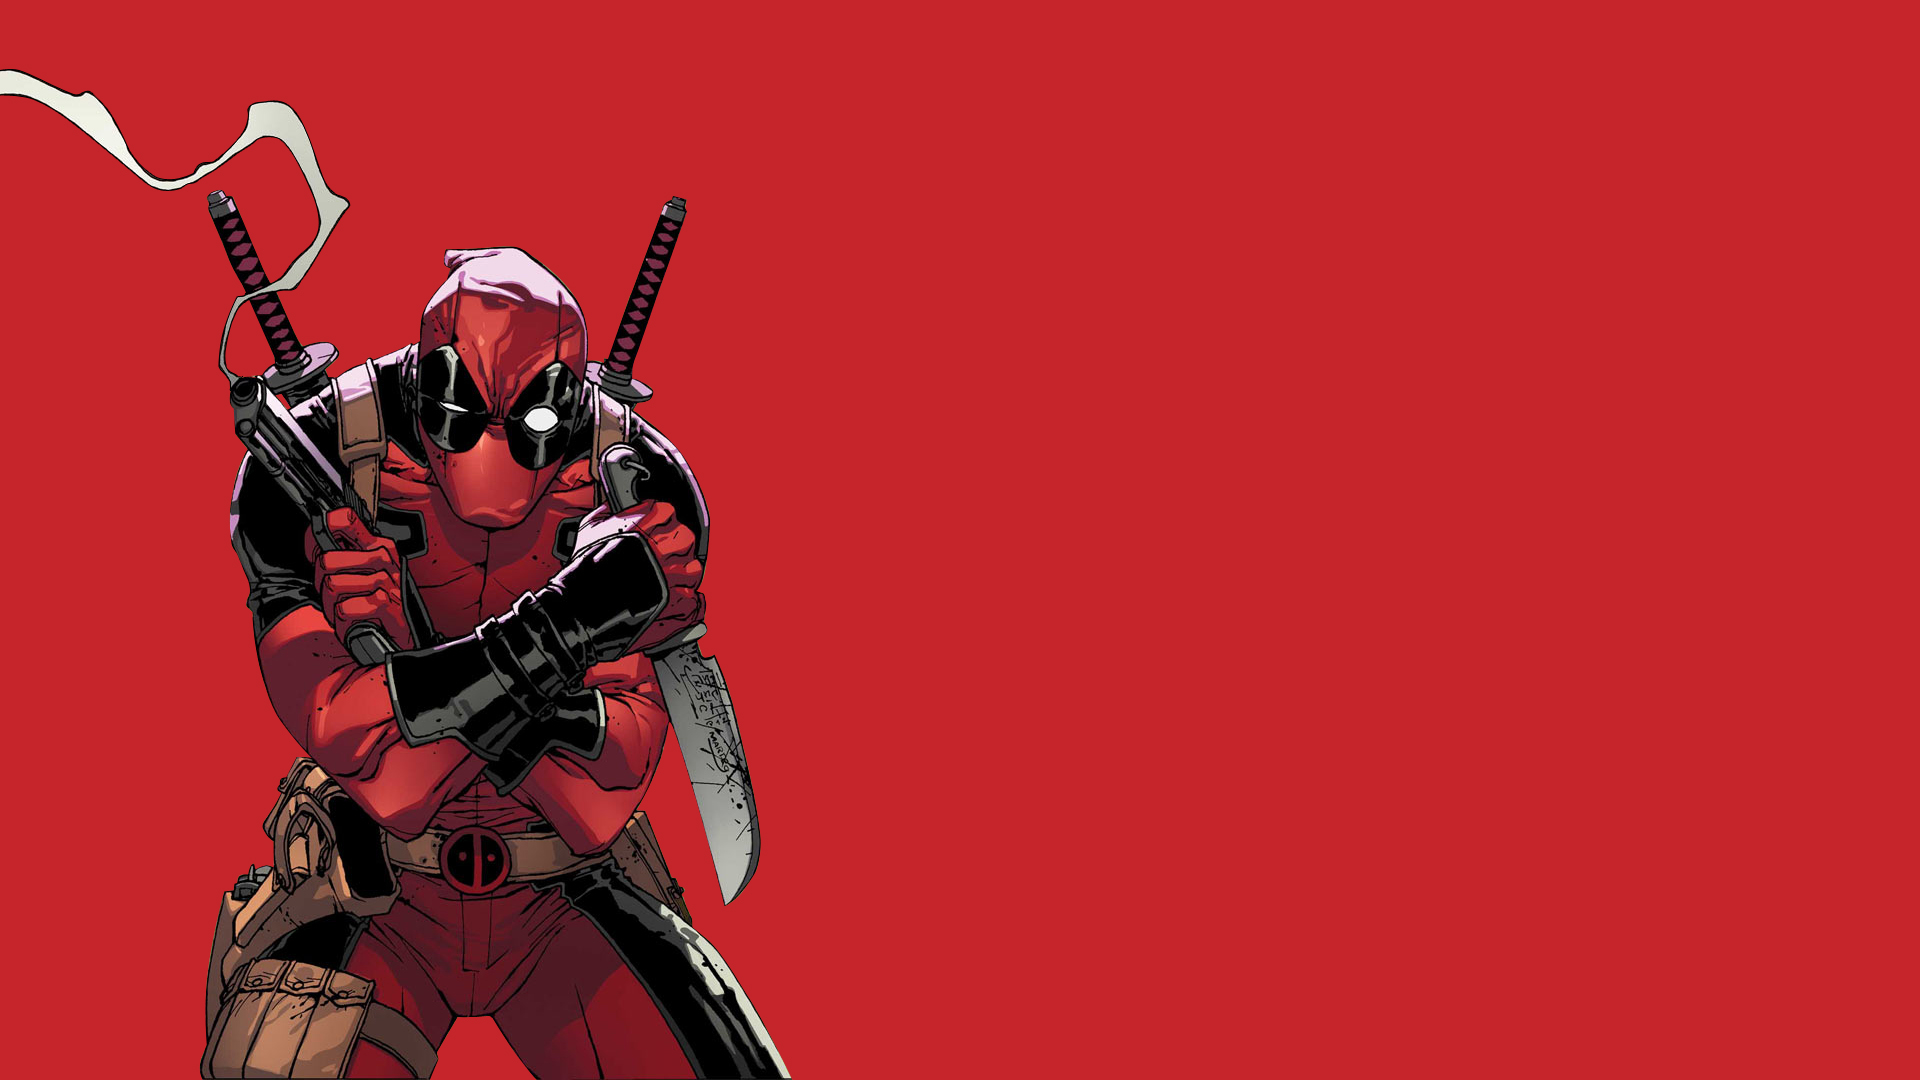 Deadpool Wallpapers Pictures Images HD Wallpapers Download Free Images Wallpaper [wallpaper981.blogspot.com]